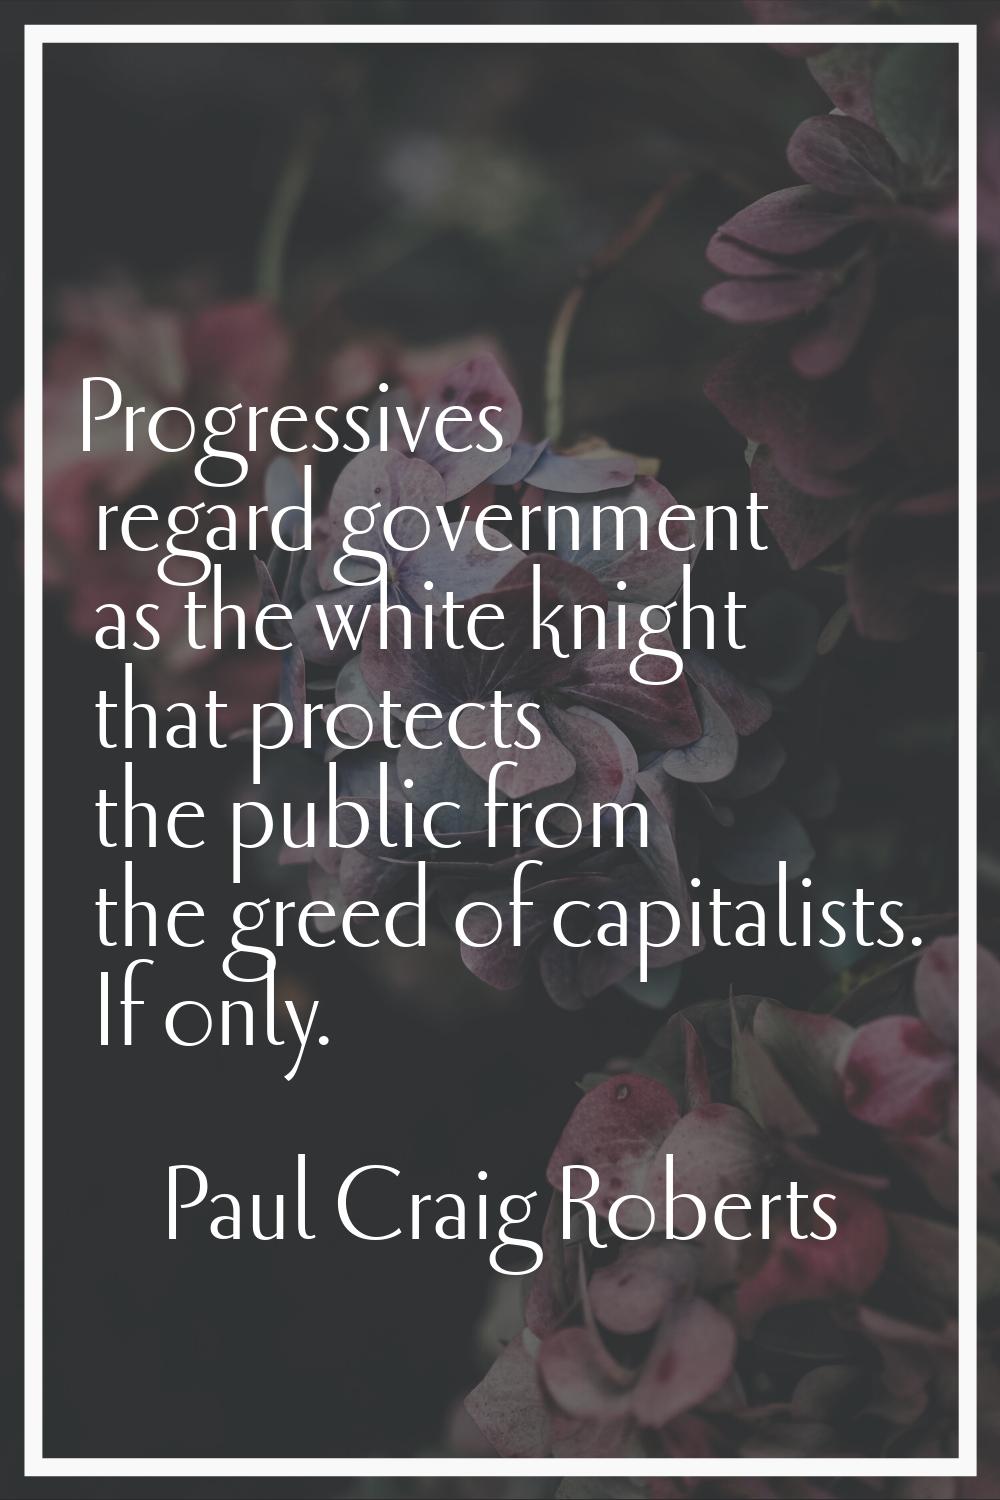 Progressives regard government as the white knight that protects the public from the greed of capit